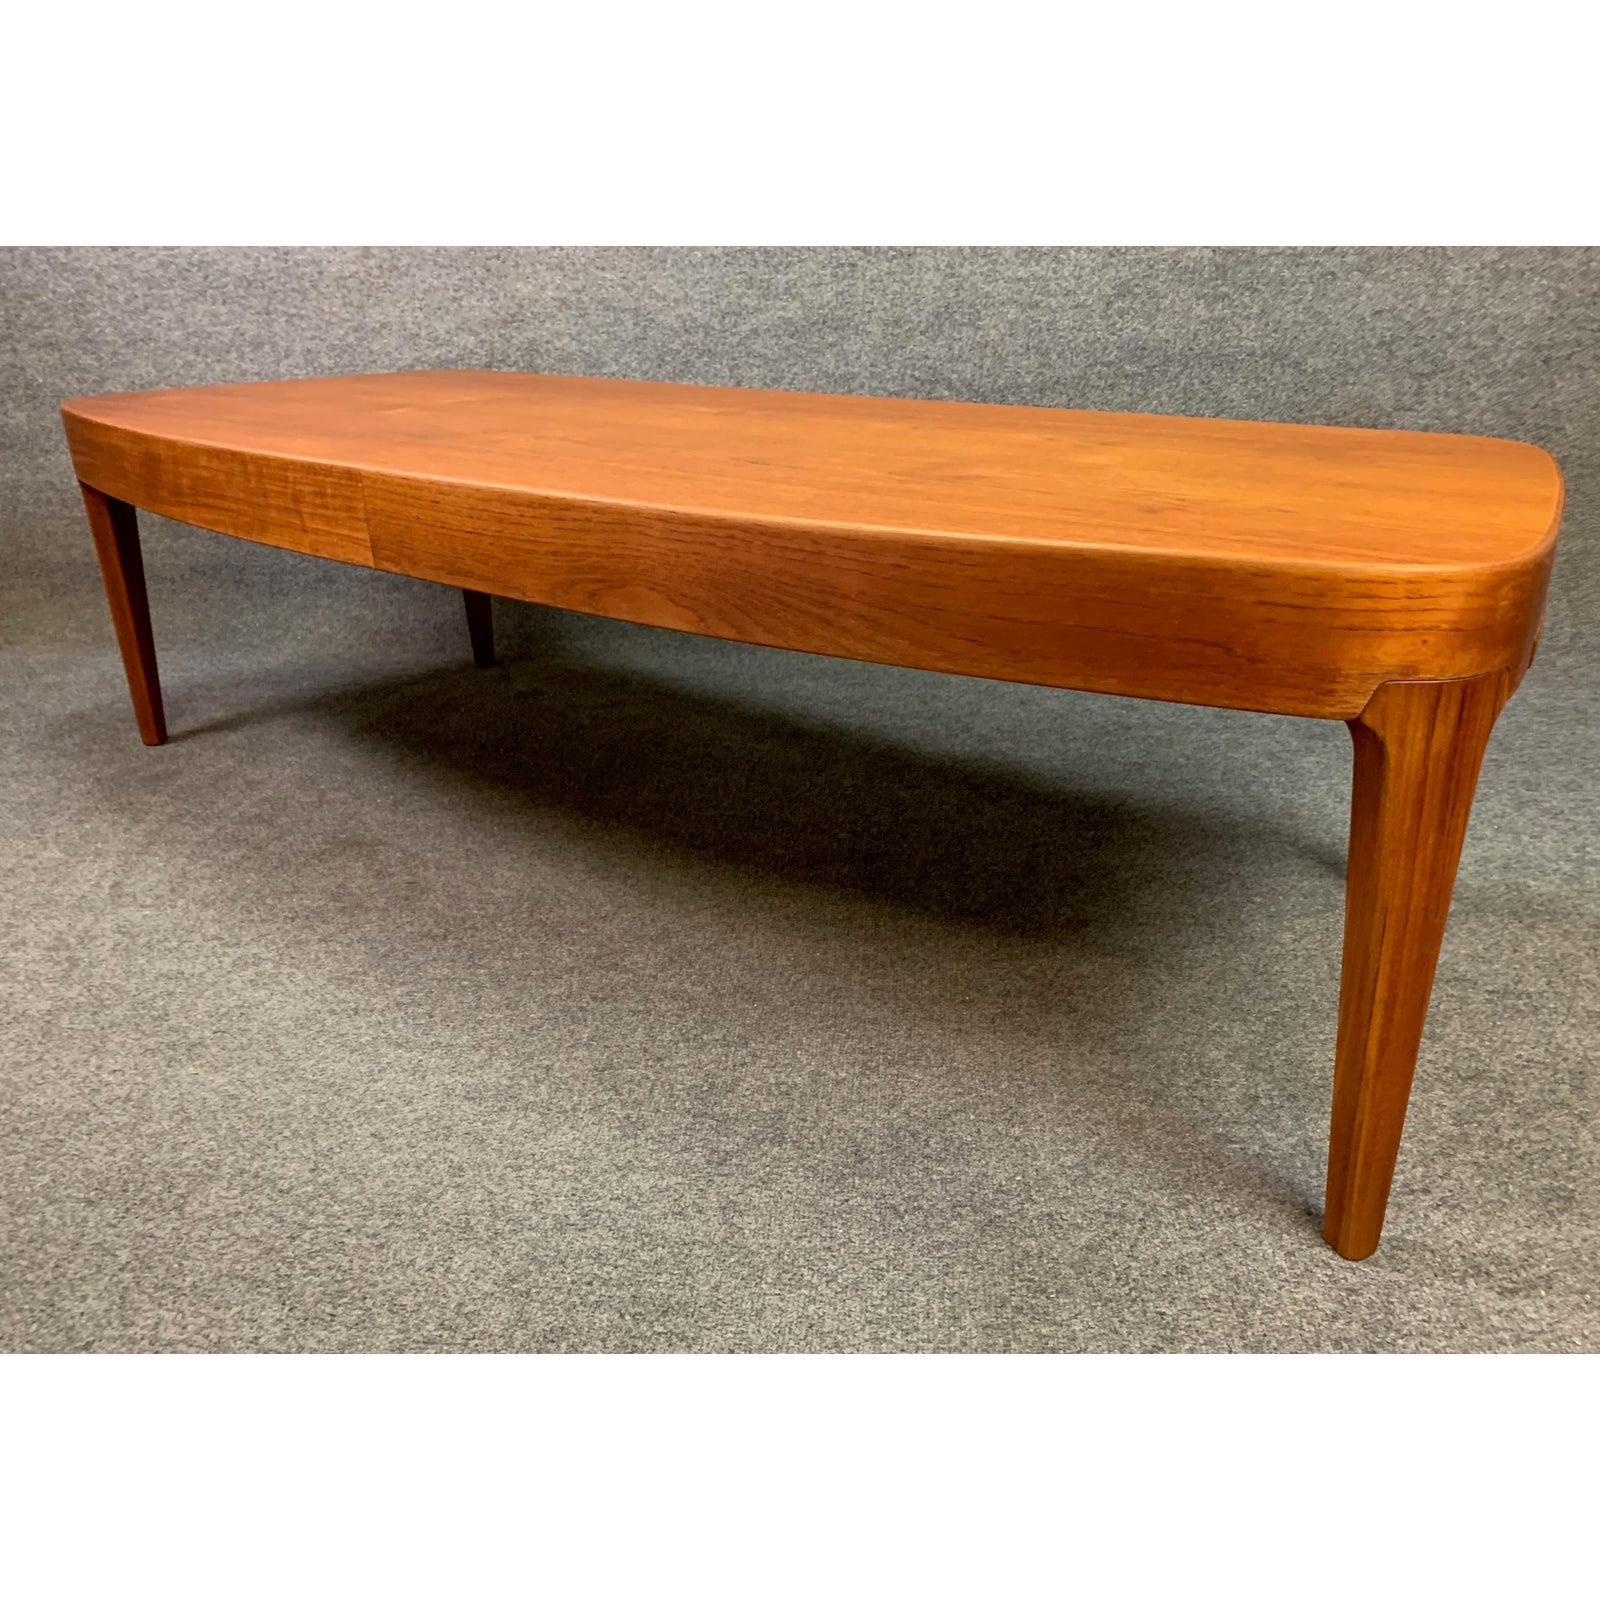 Here is a beautiful 1960s Scandinavian modern cocktail table in teak wood recently imported from Denmark to California before its restoration.
This sculptural large coffee table, reminiscent of a Johannes Andersen's design, features an organic